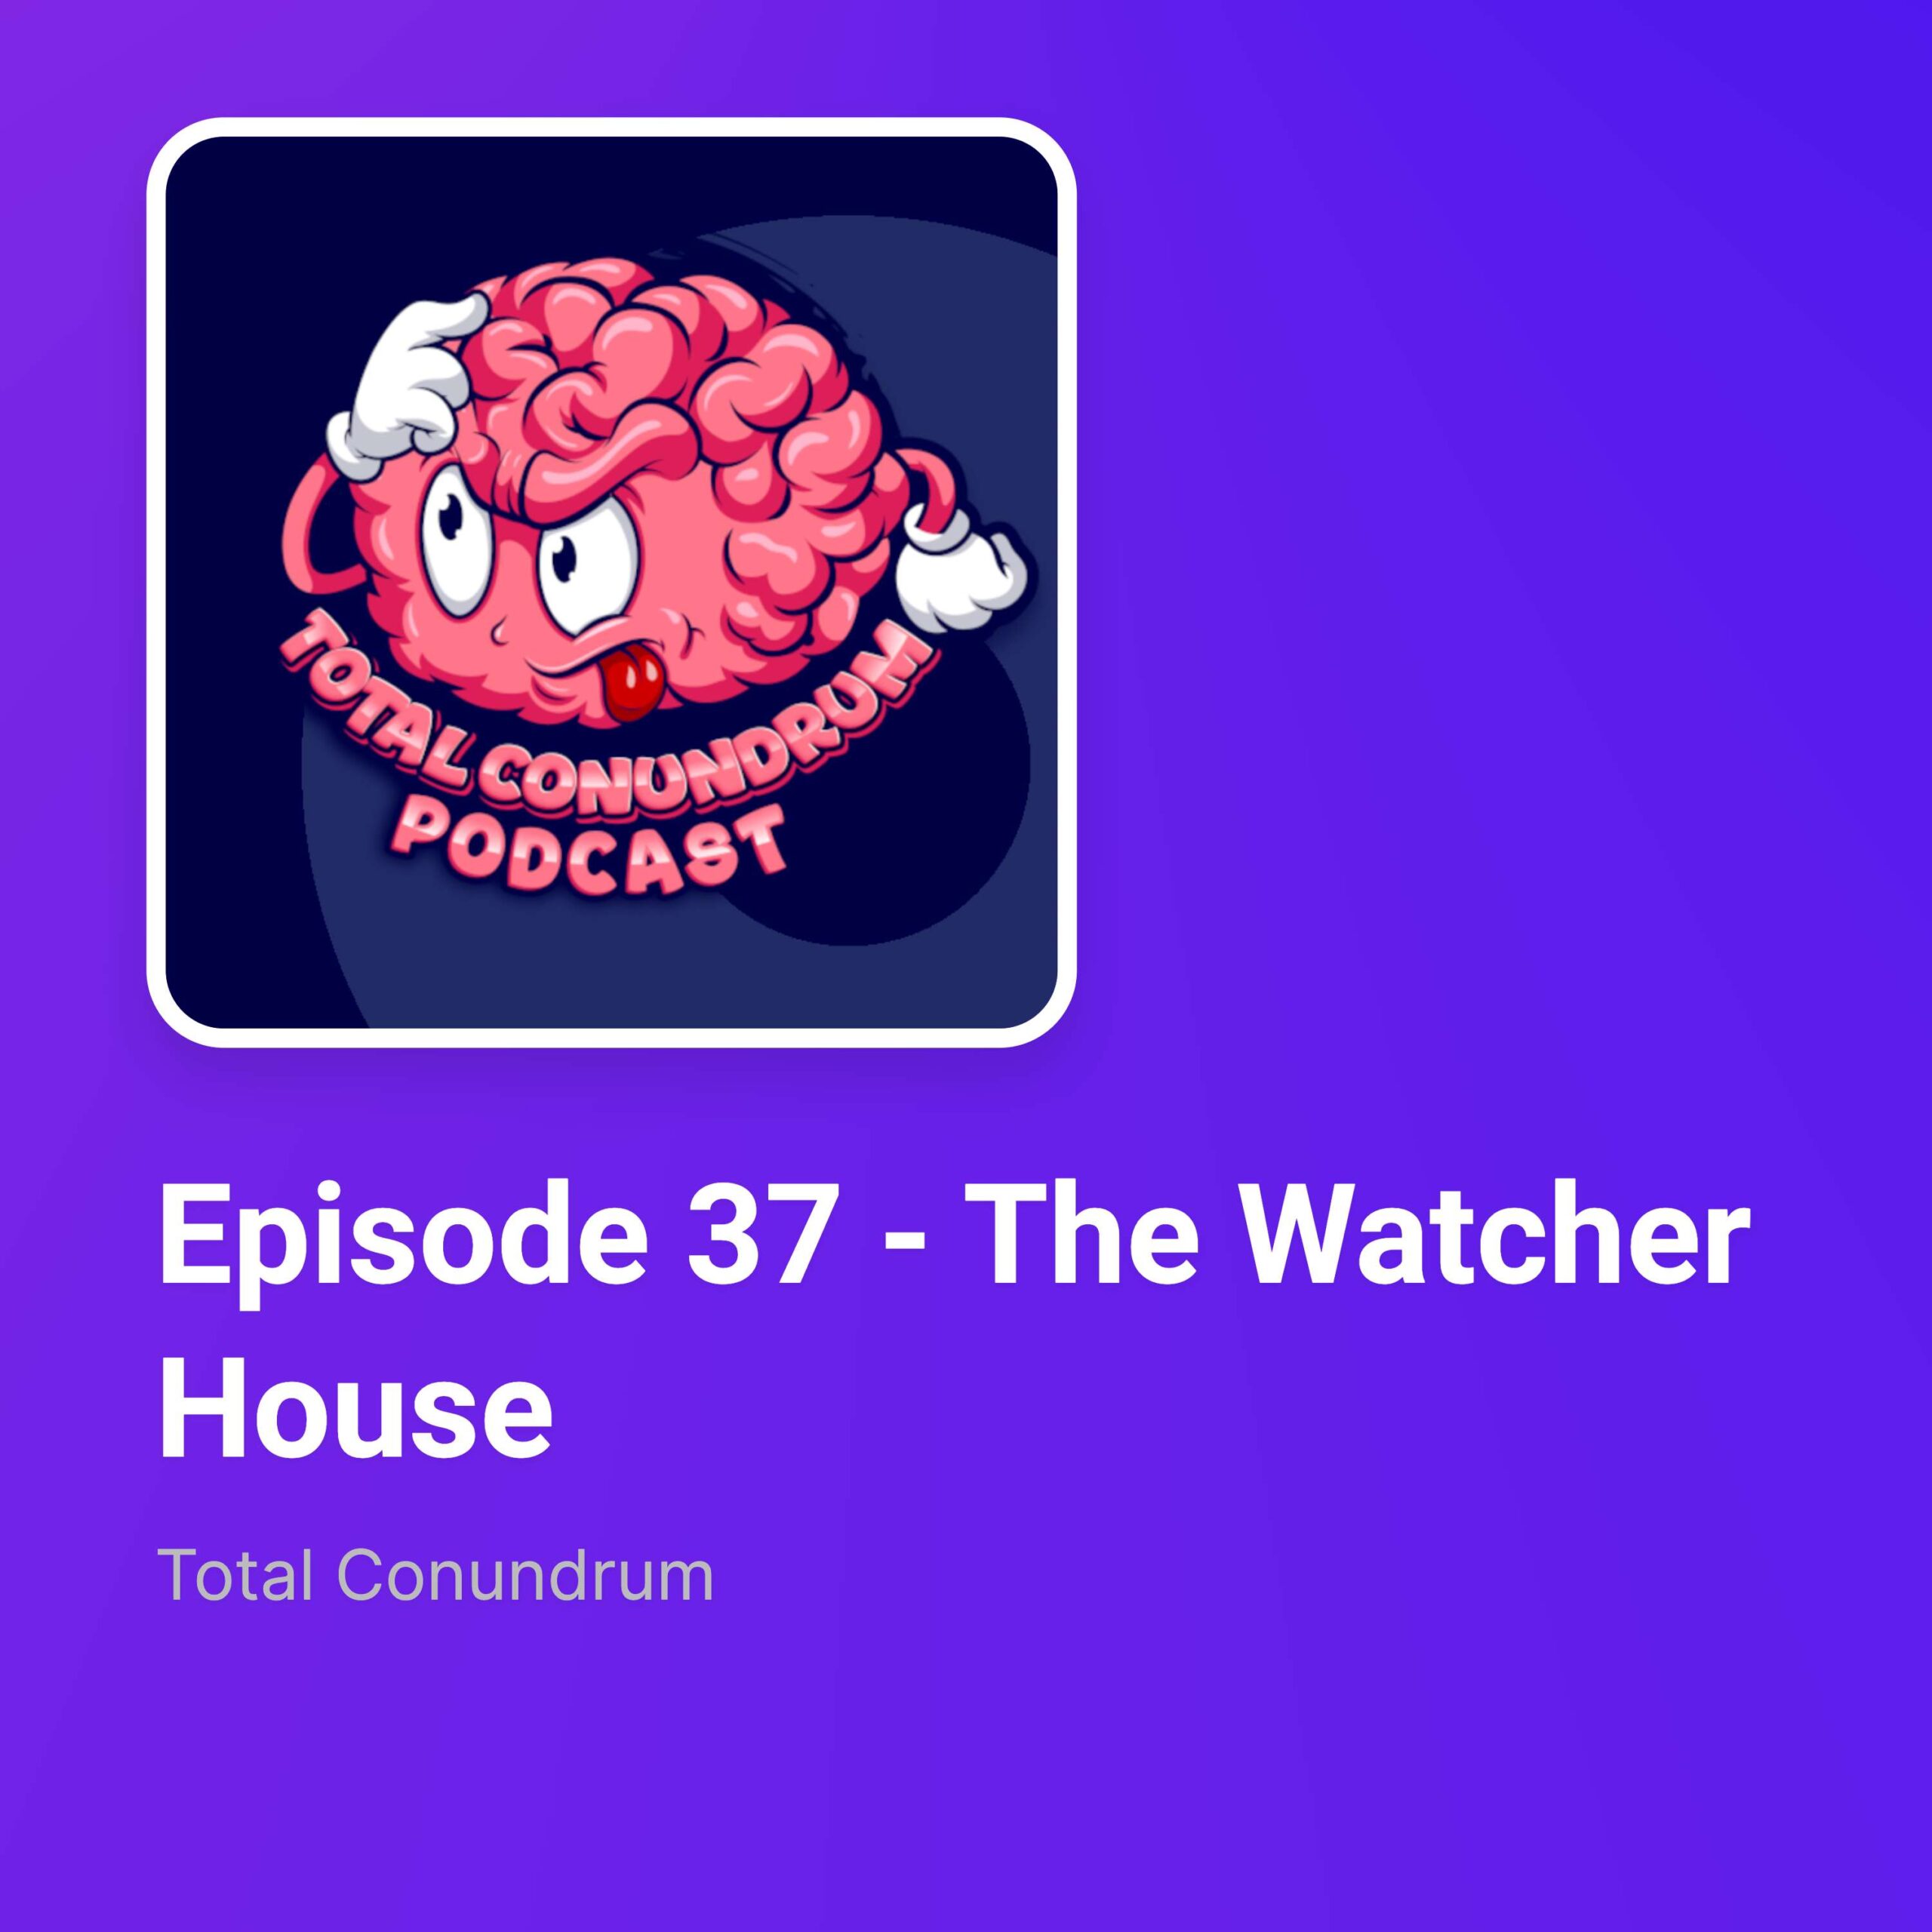 Episode 37 - The Watcher House